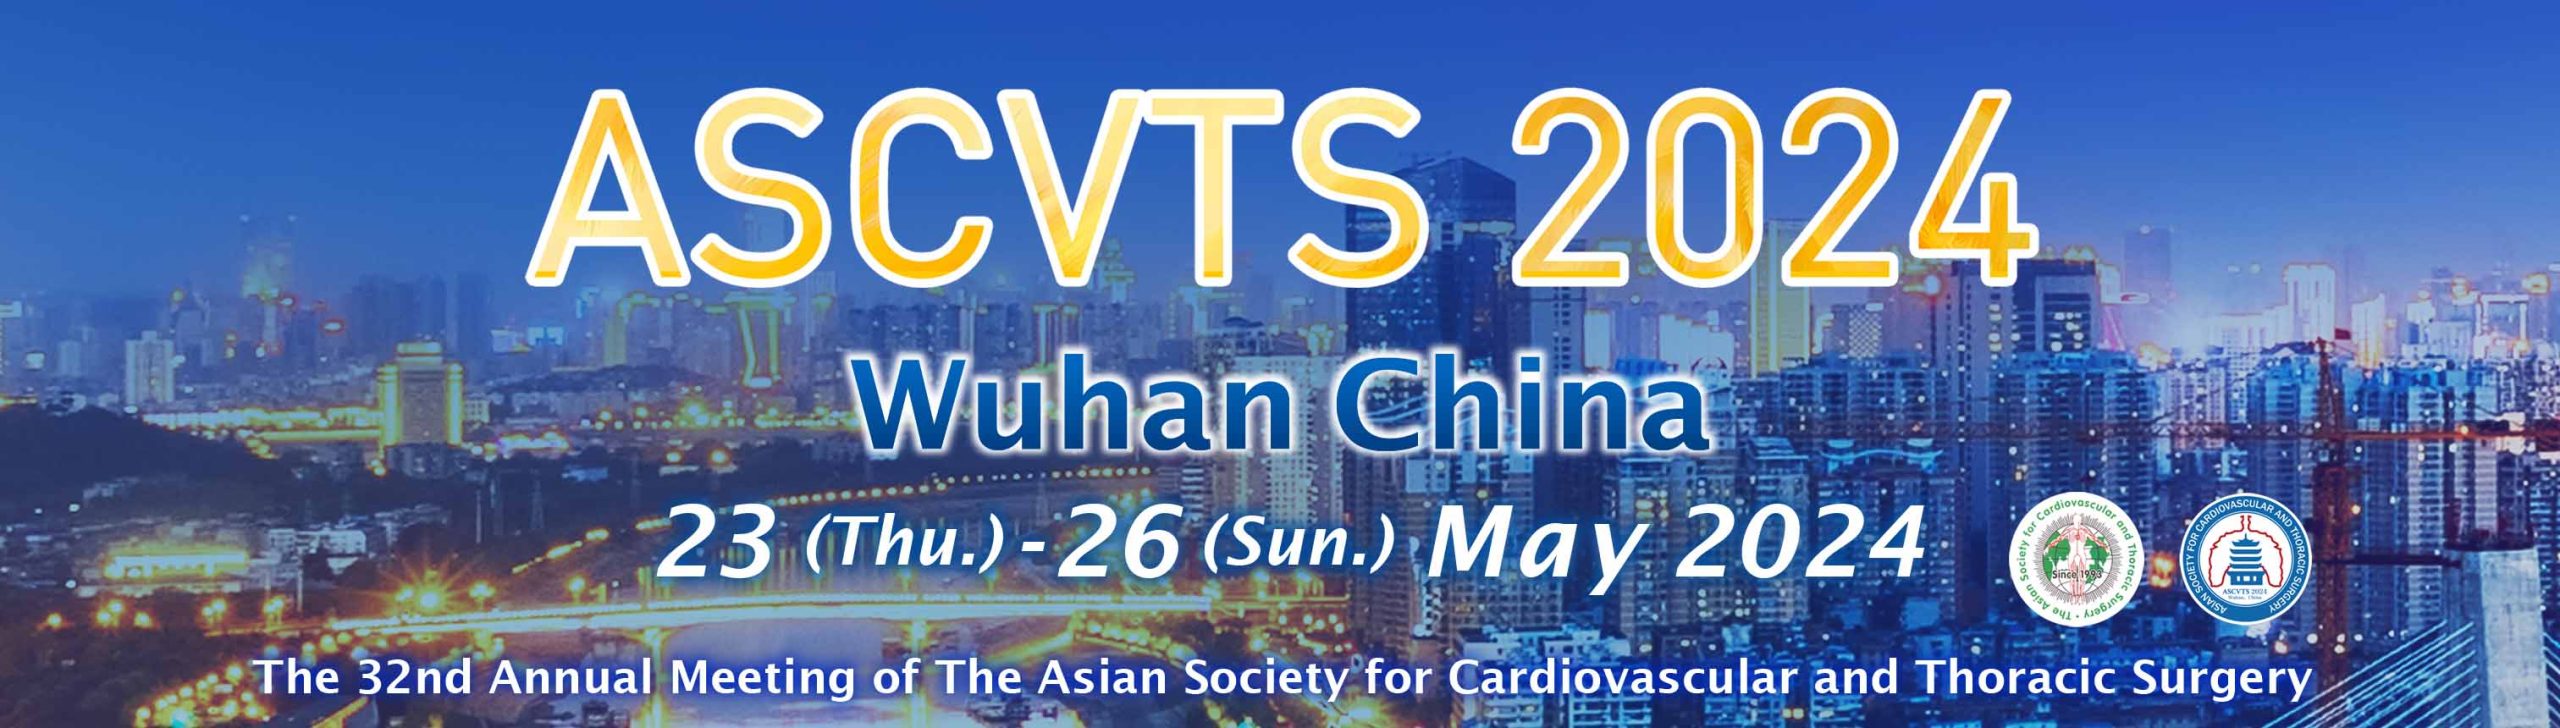 ASCVTS2024 Wuhan China 23(Thu.) - 26(Sun.) May 2024 The 32nd Annual Meeting of Asian Society for Cardiovascular and Thoracic Surgery